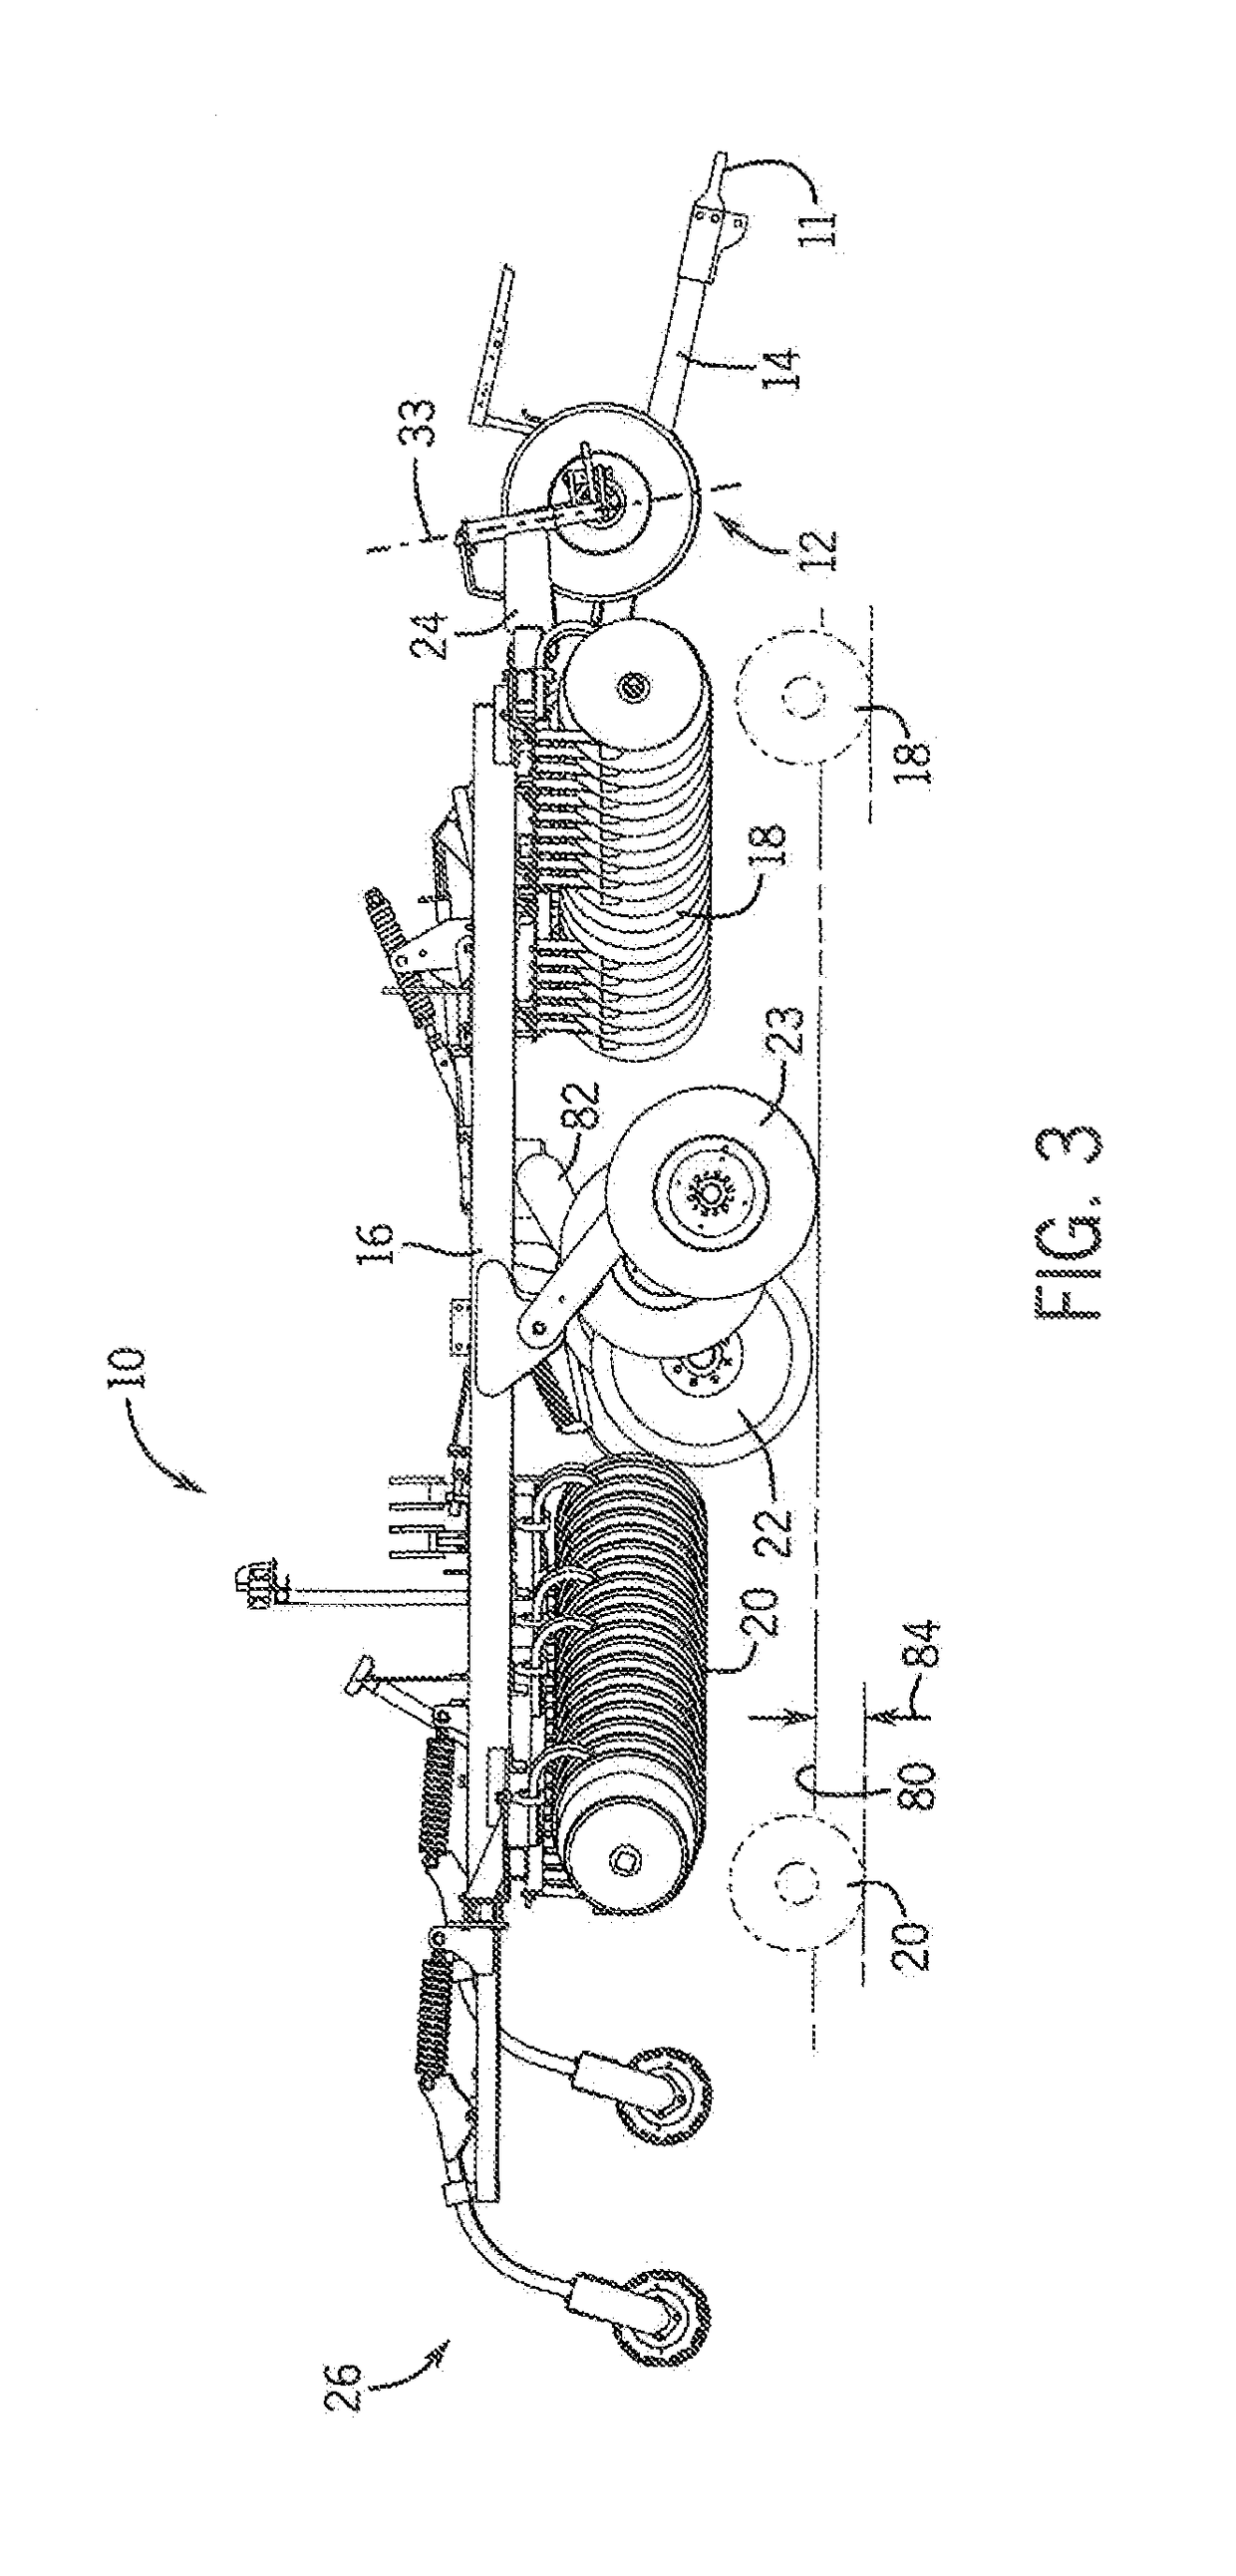 Remote hydraulic positioning of an implement stabilizer wheel